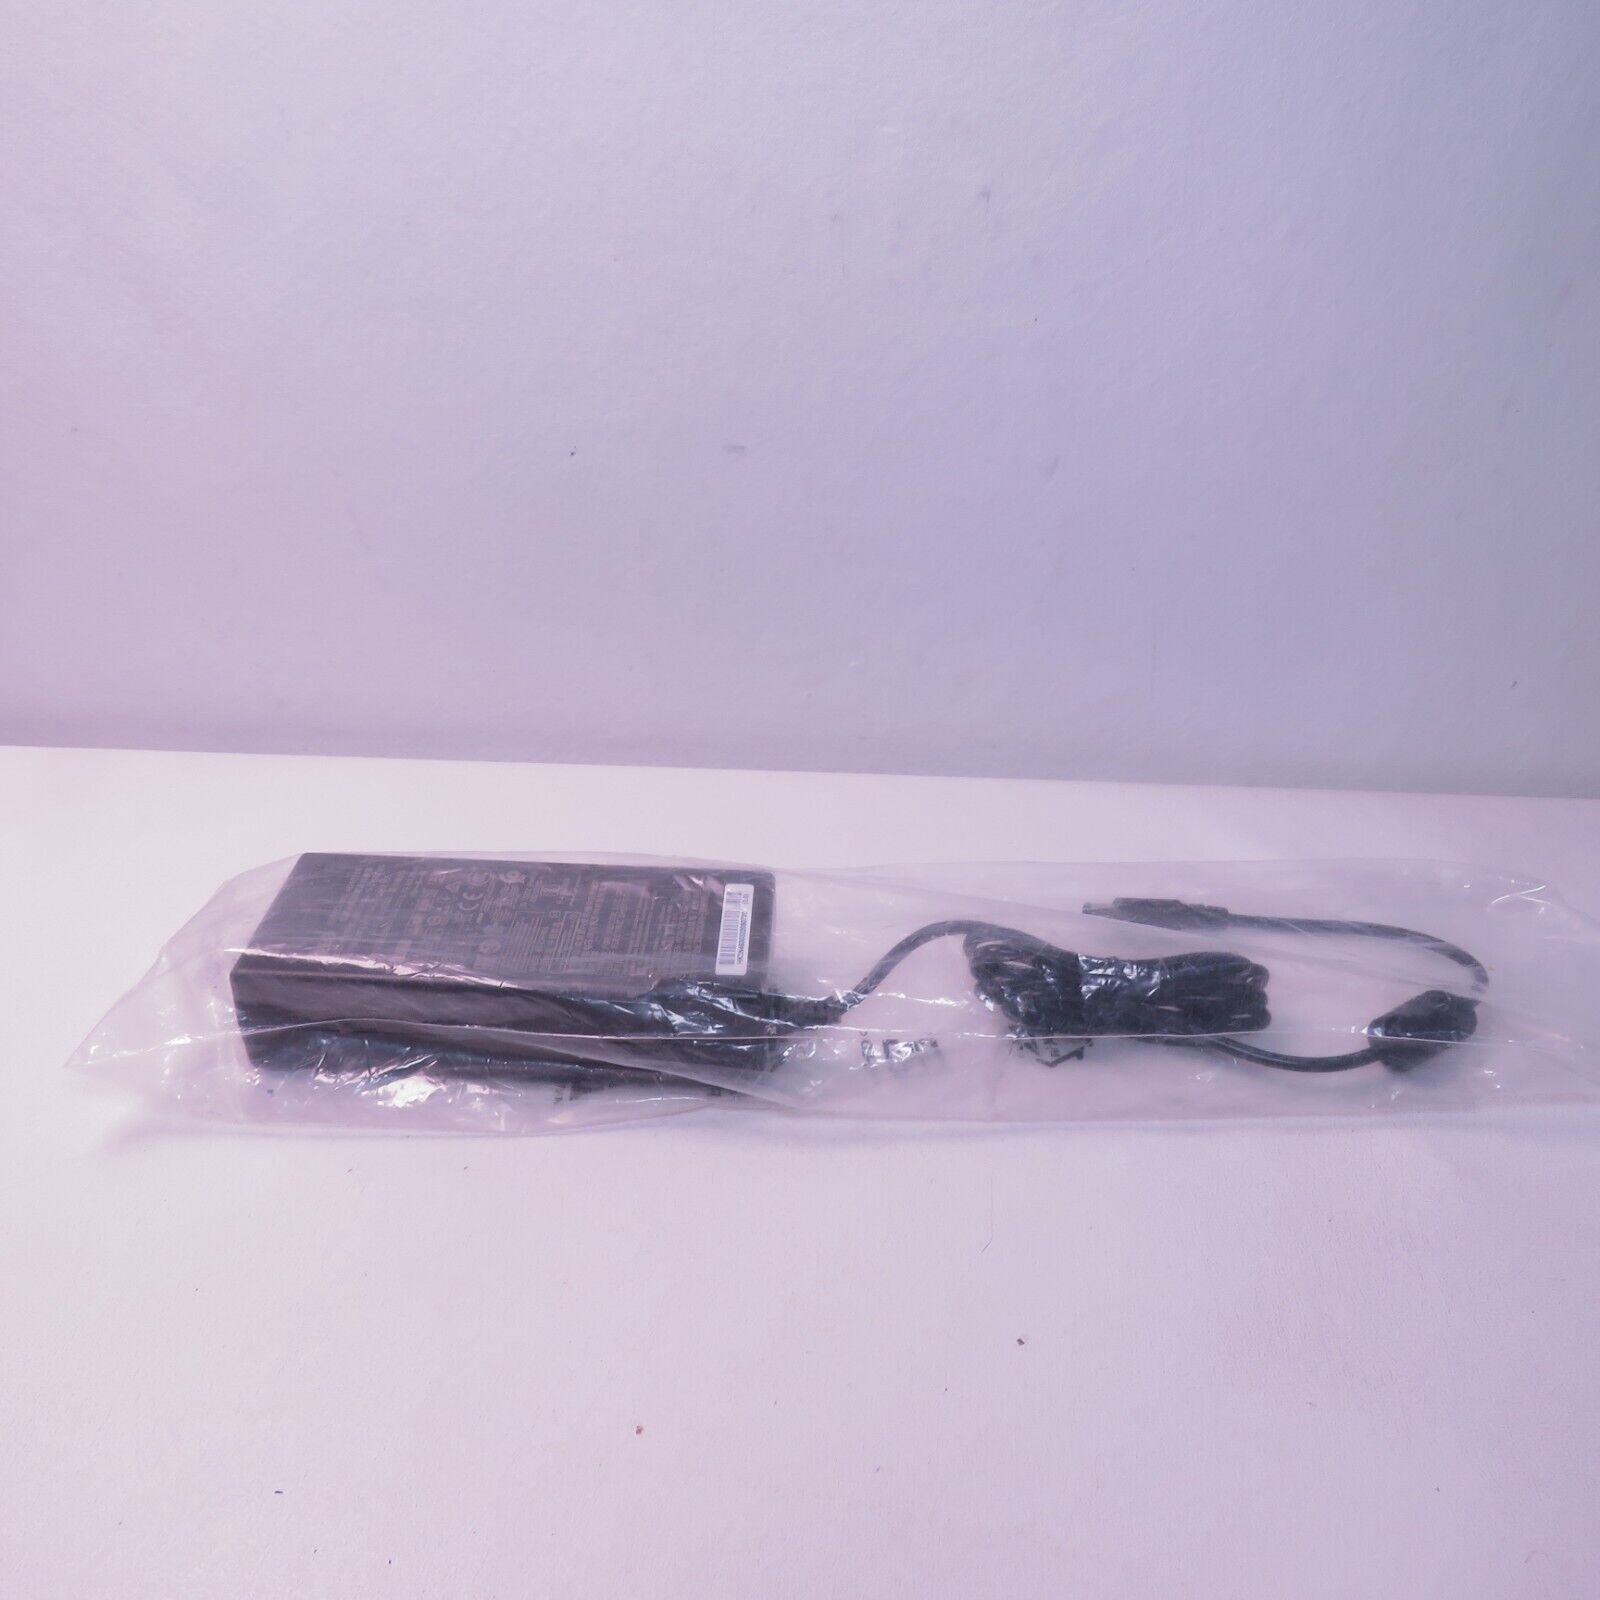 Genuine LG Switching Power Adapter Model ADS-110CL-19-3 19V 5.79A (VG)